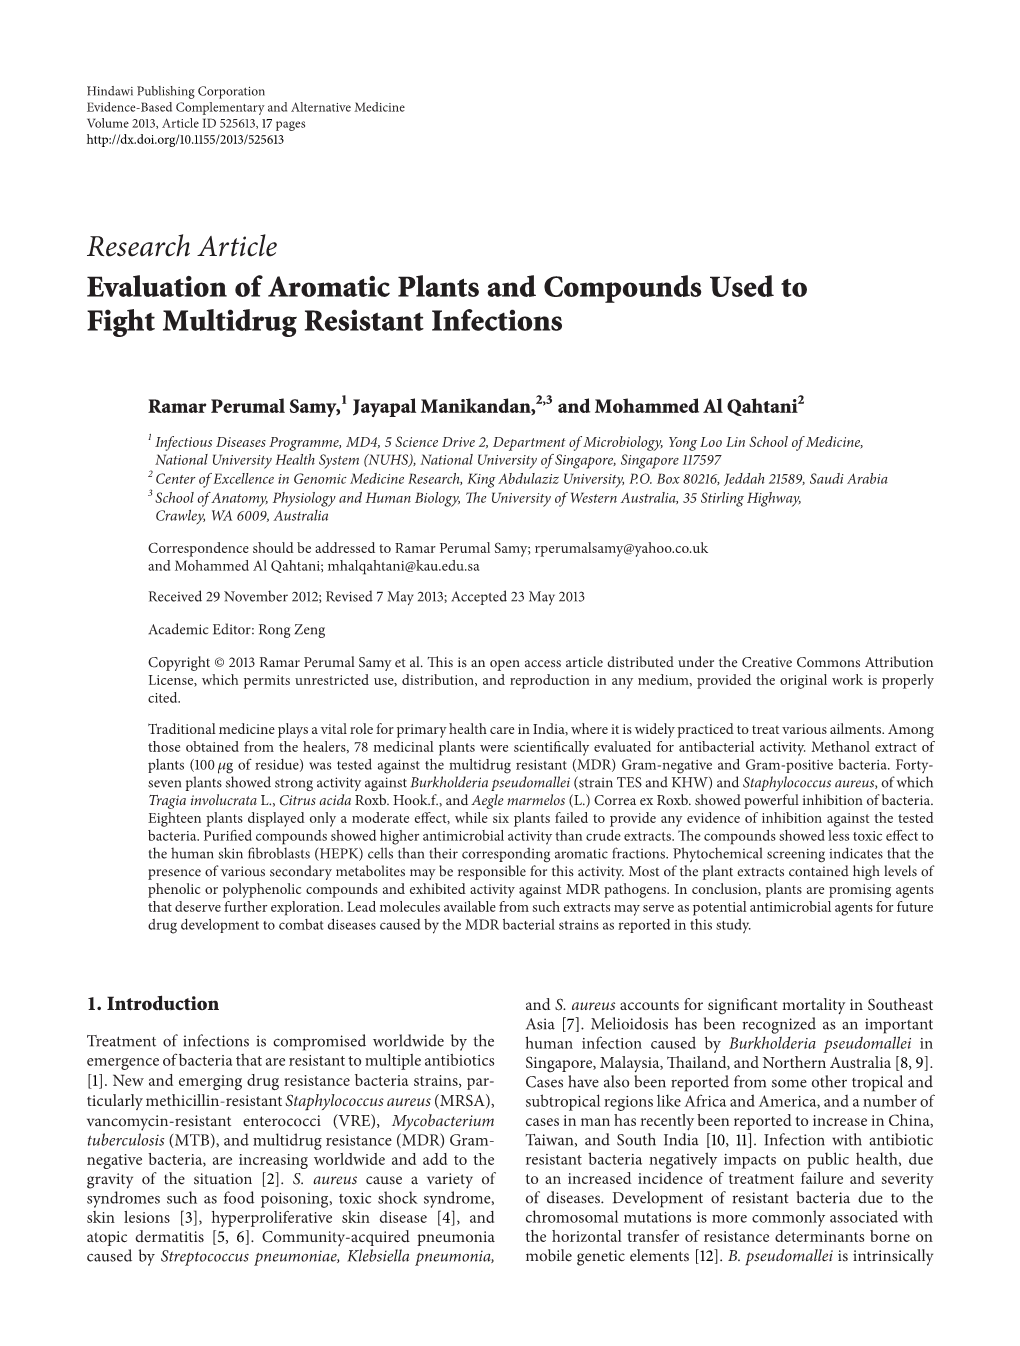 Evaluation of Aromatic Plants and Compounds Used to Fight Multidrug Resistant Infections